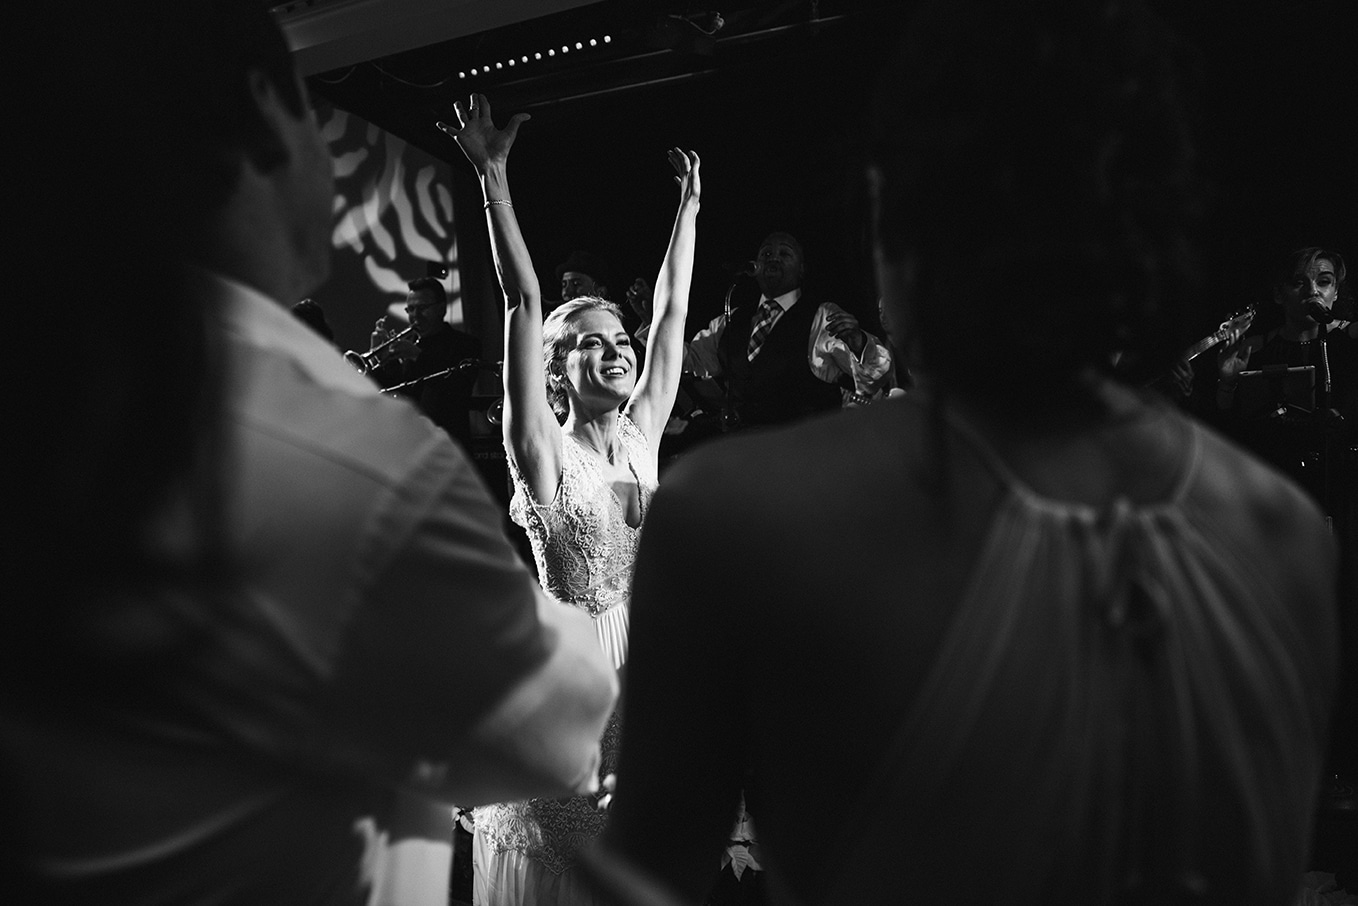 This documentary photograph of a bride dancing at her nantucket wedding is one of the best wedding photographs of 2016